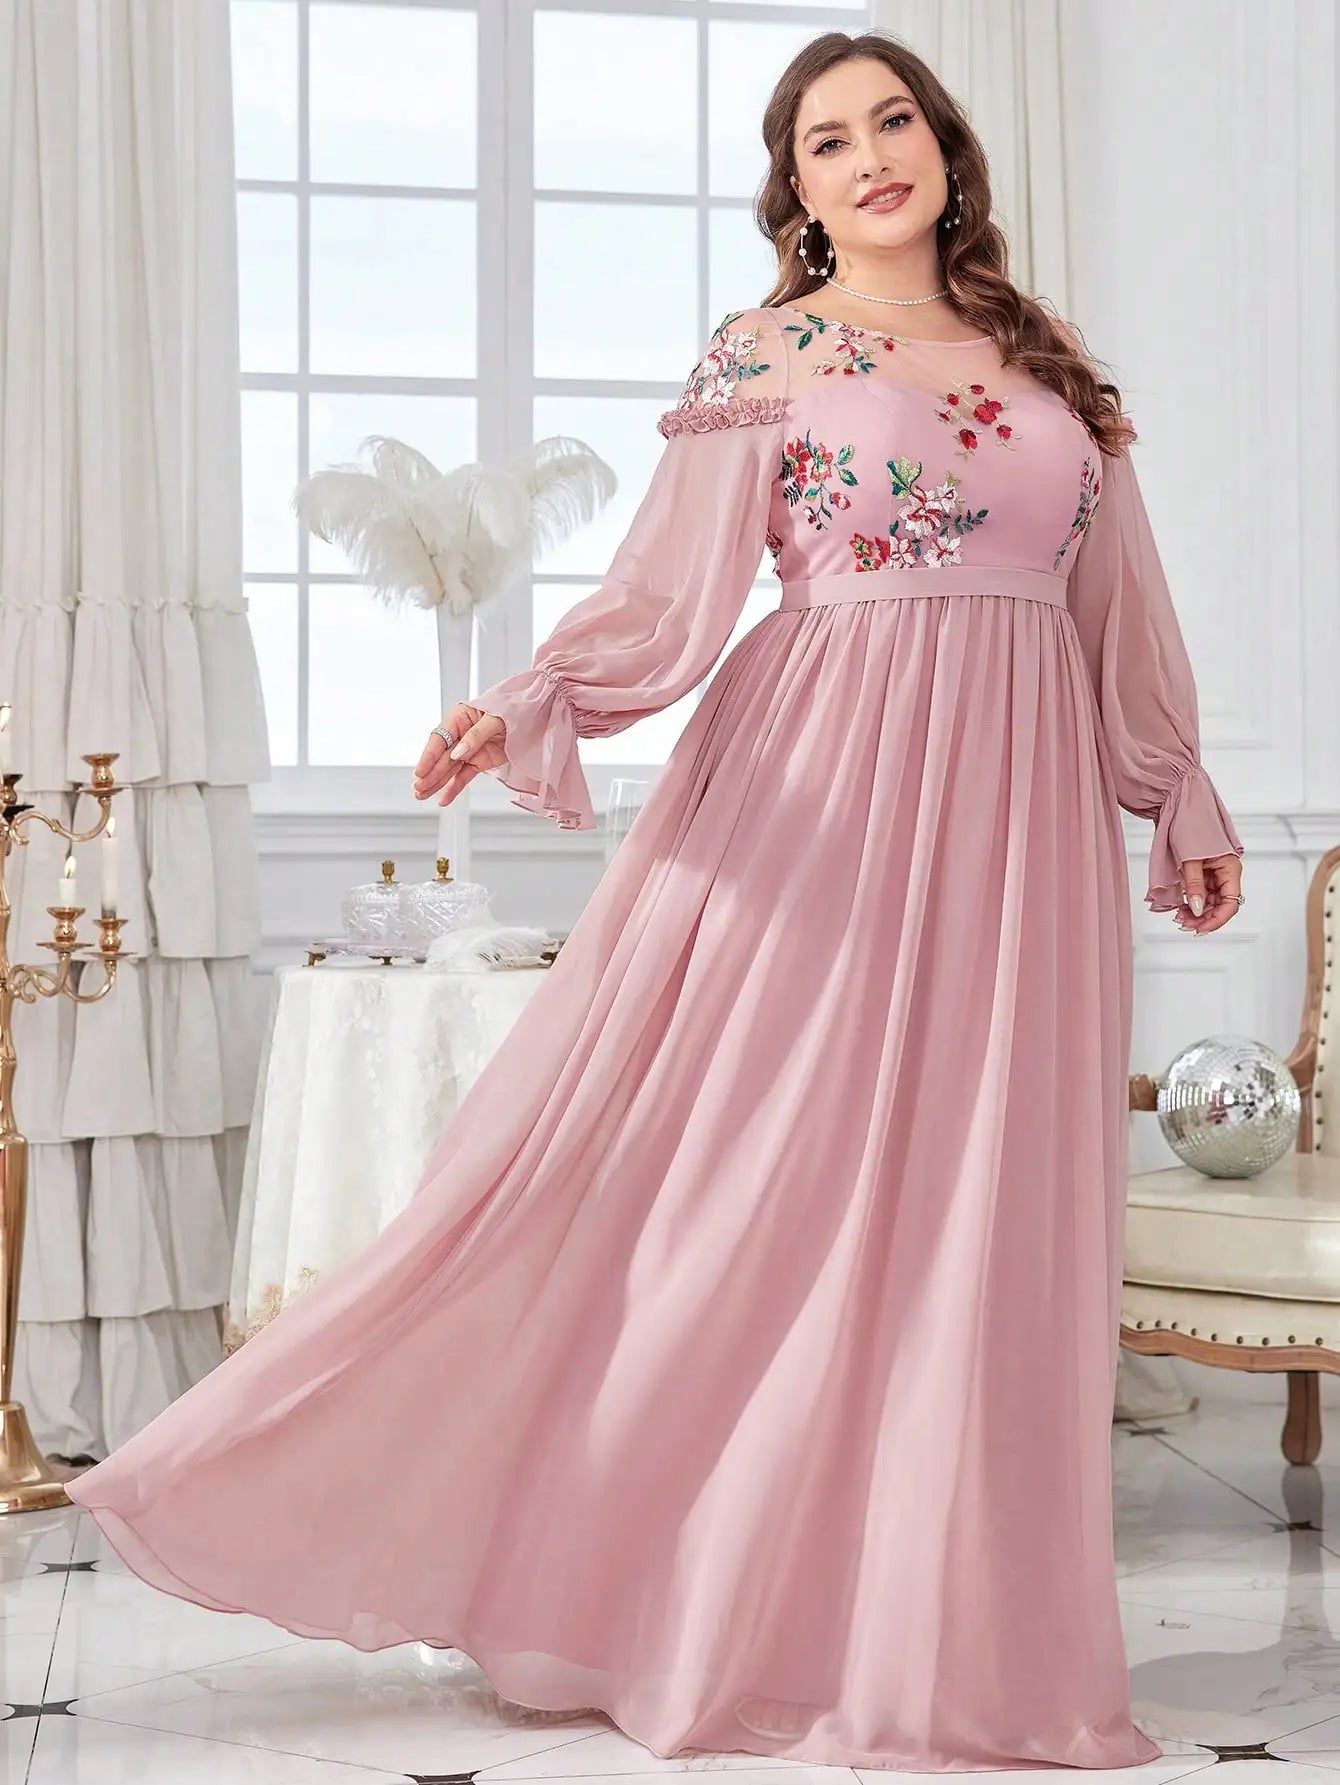 Mgiacy plus size Round neck Color embroidered half-through chiffon chiffon long sleeve dress Evening gown Ball dress Party dress